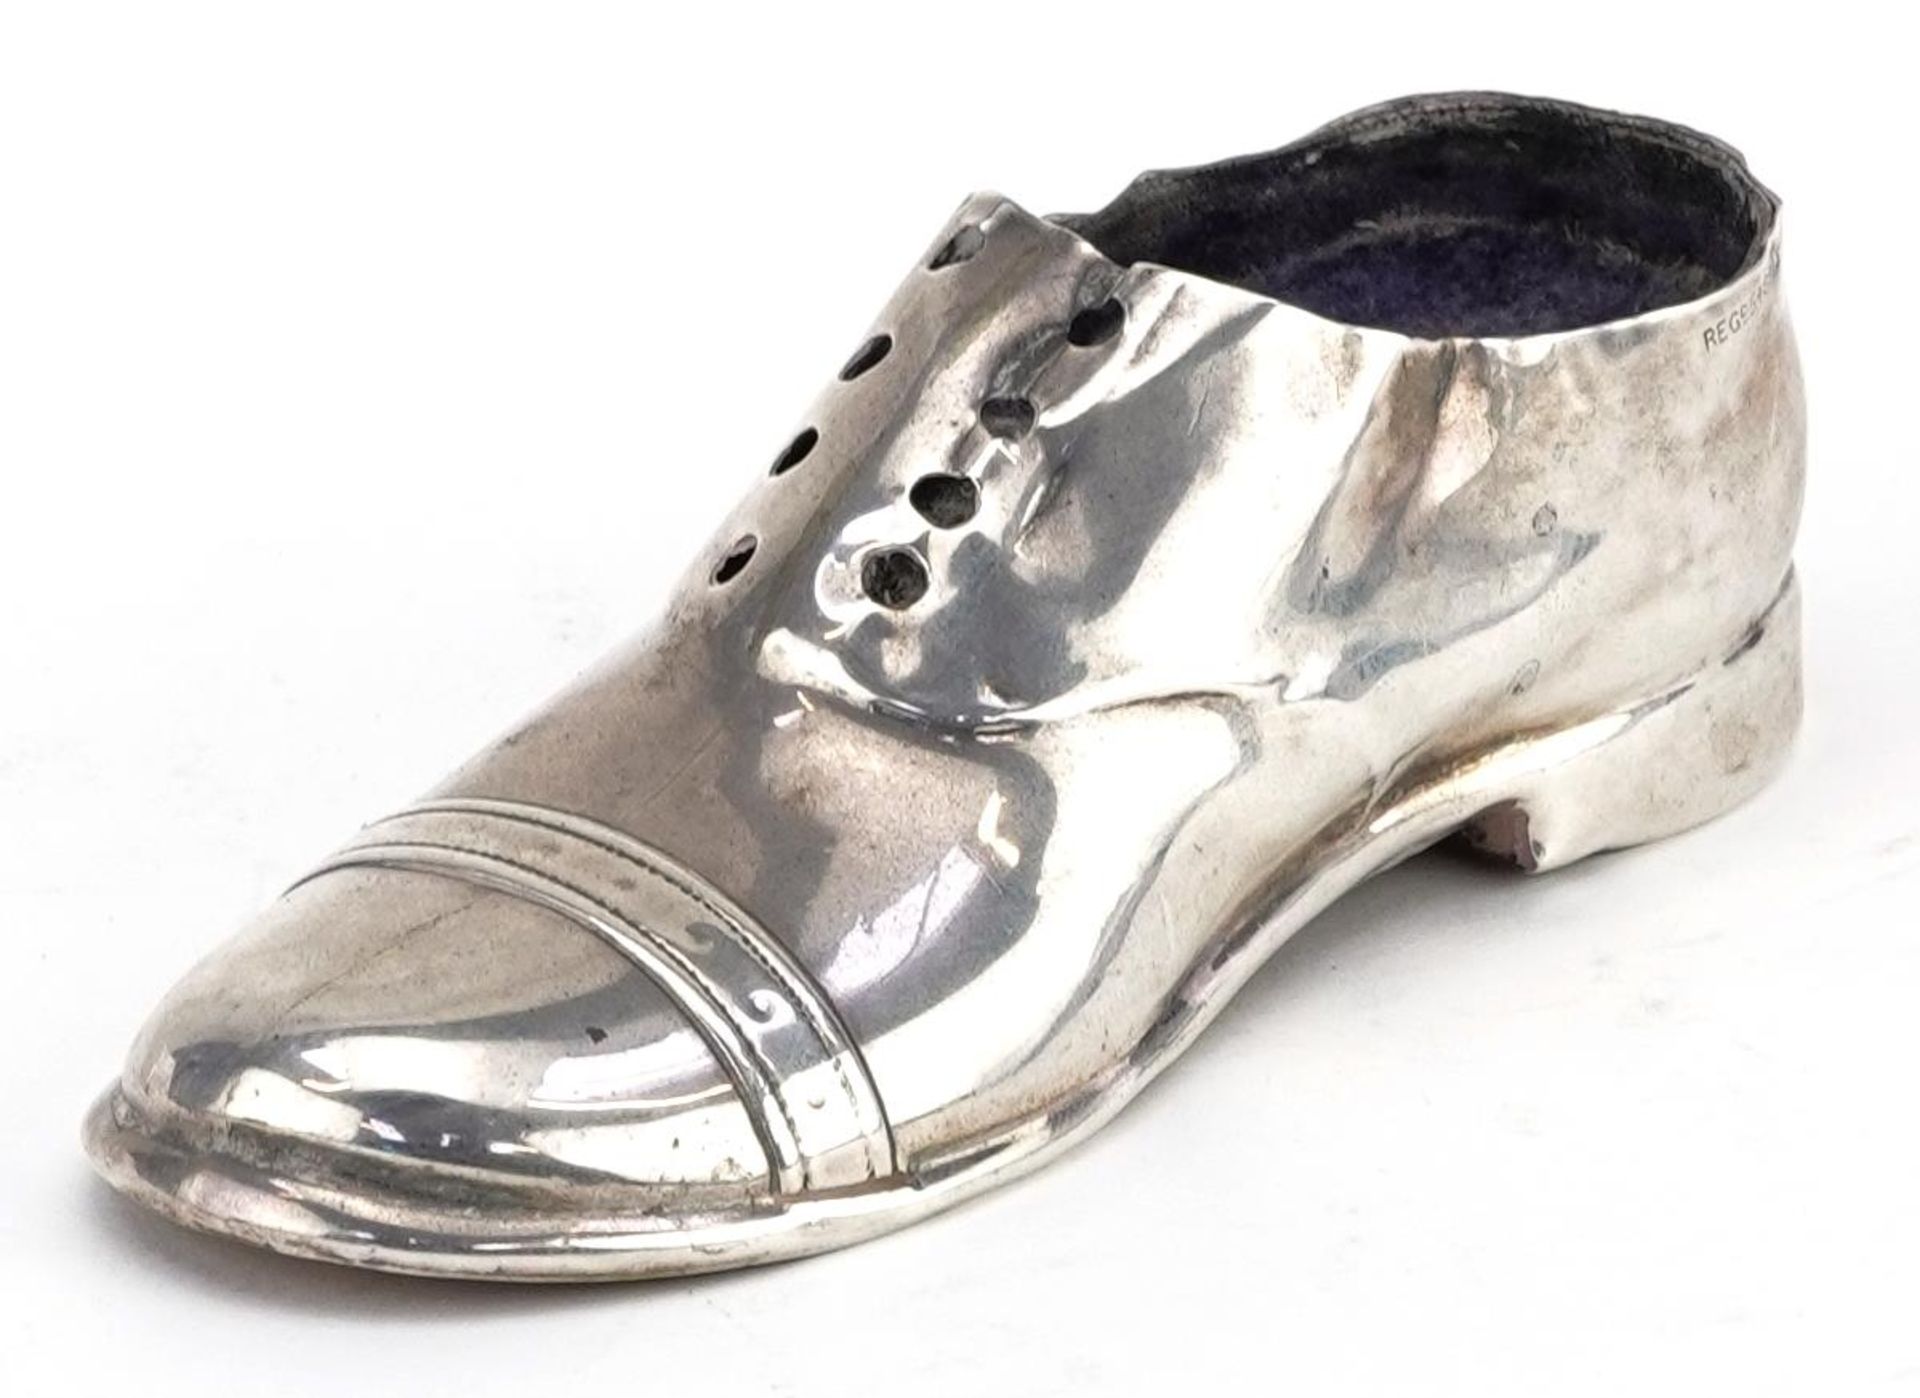 S Blanckensee & Son Ltd, large Edwardian silver and oak pin cushion in the form of a shoe, Chester